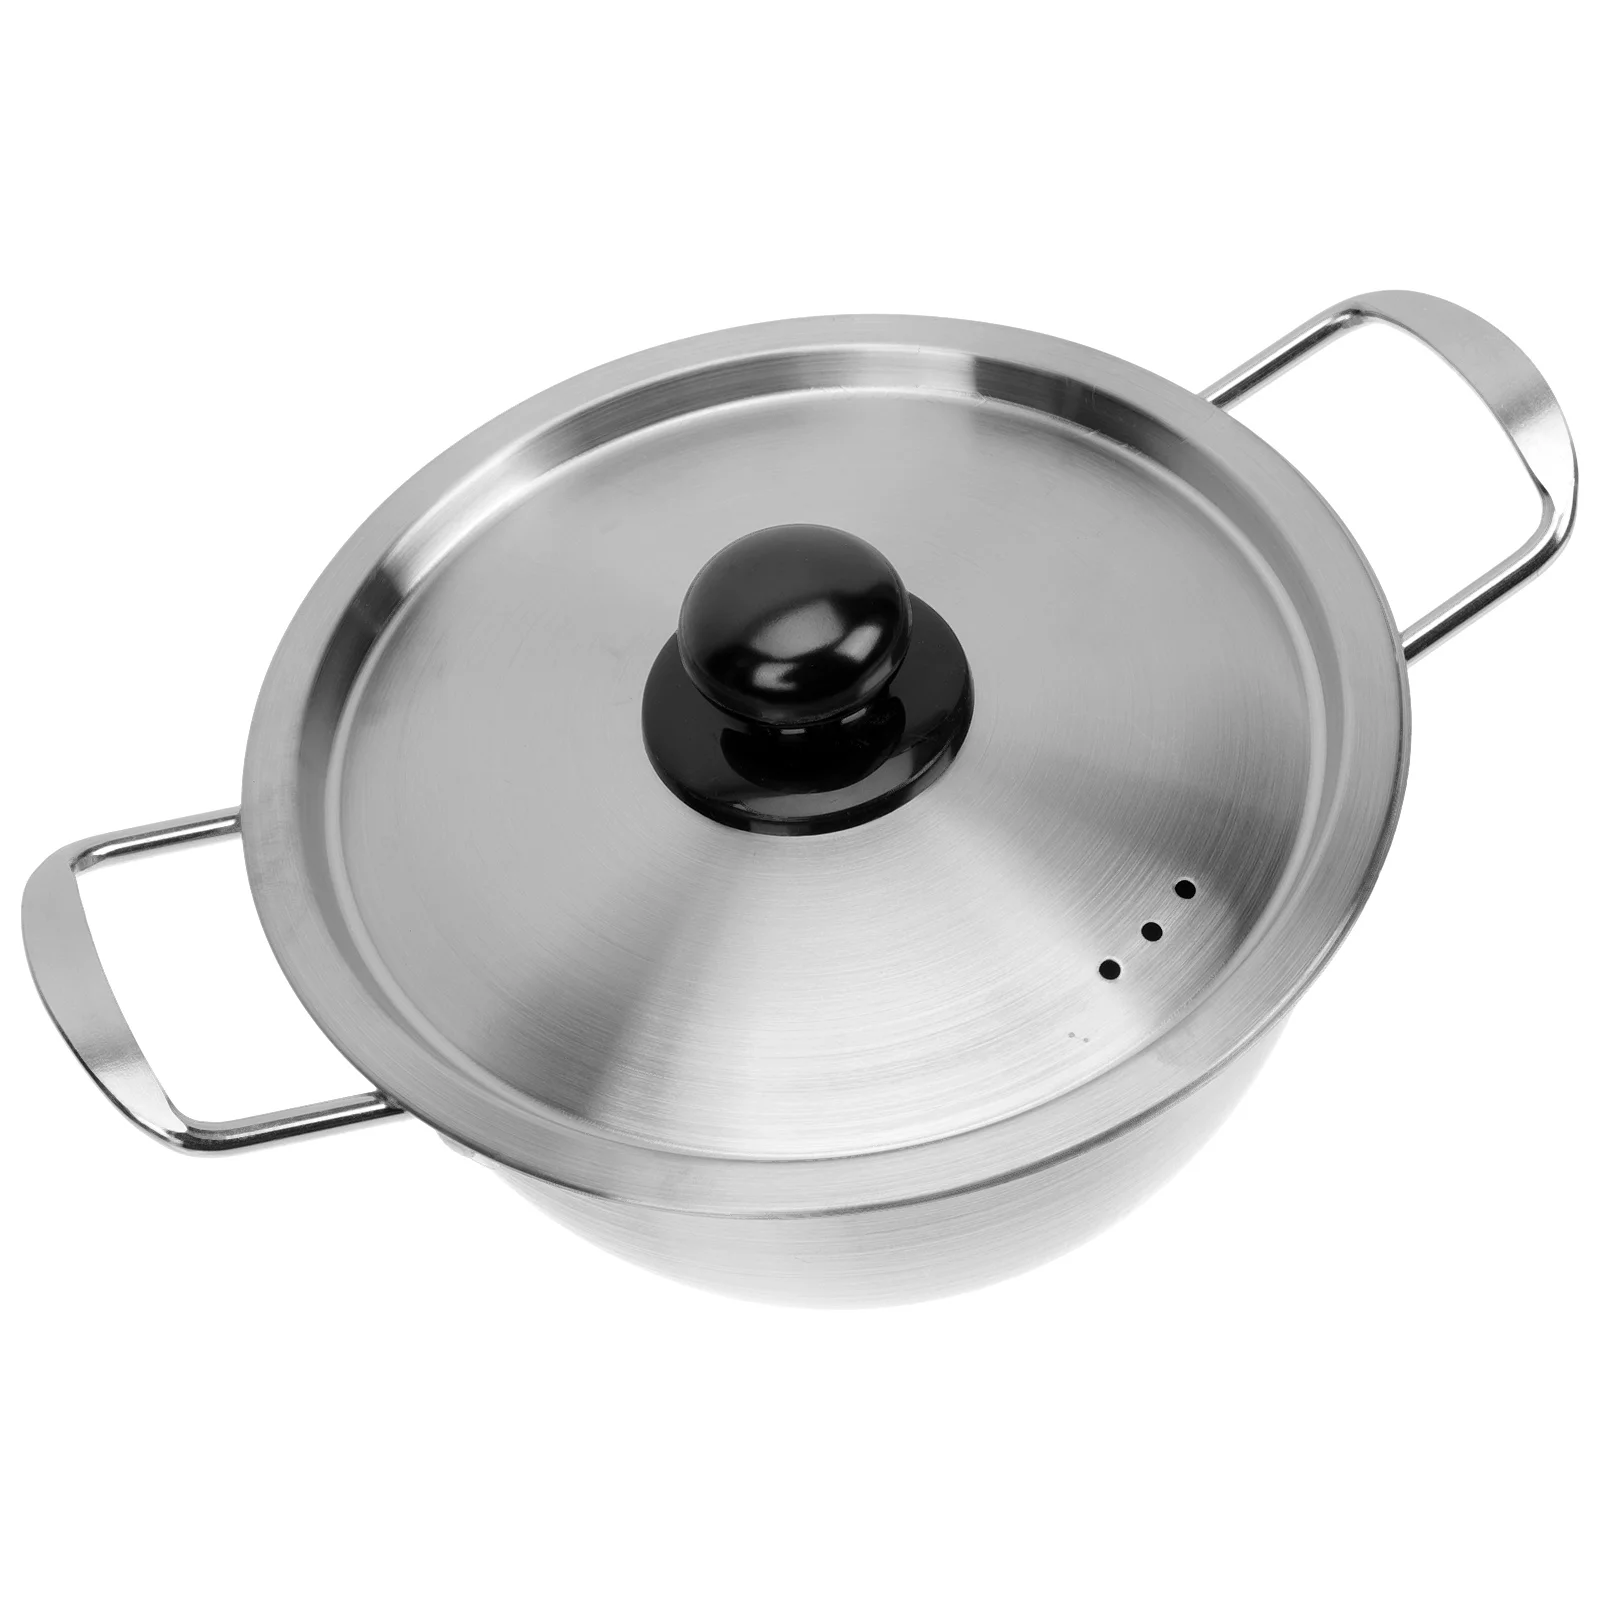 

Stainless Steel Instant Noodle Pot Household Cookware Cooking Utensil Non Stick Small Soup Ramen Stock Induction Pans